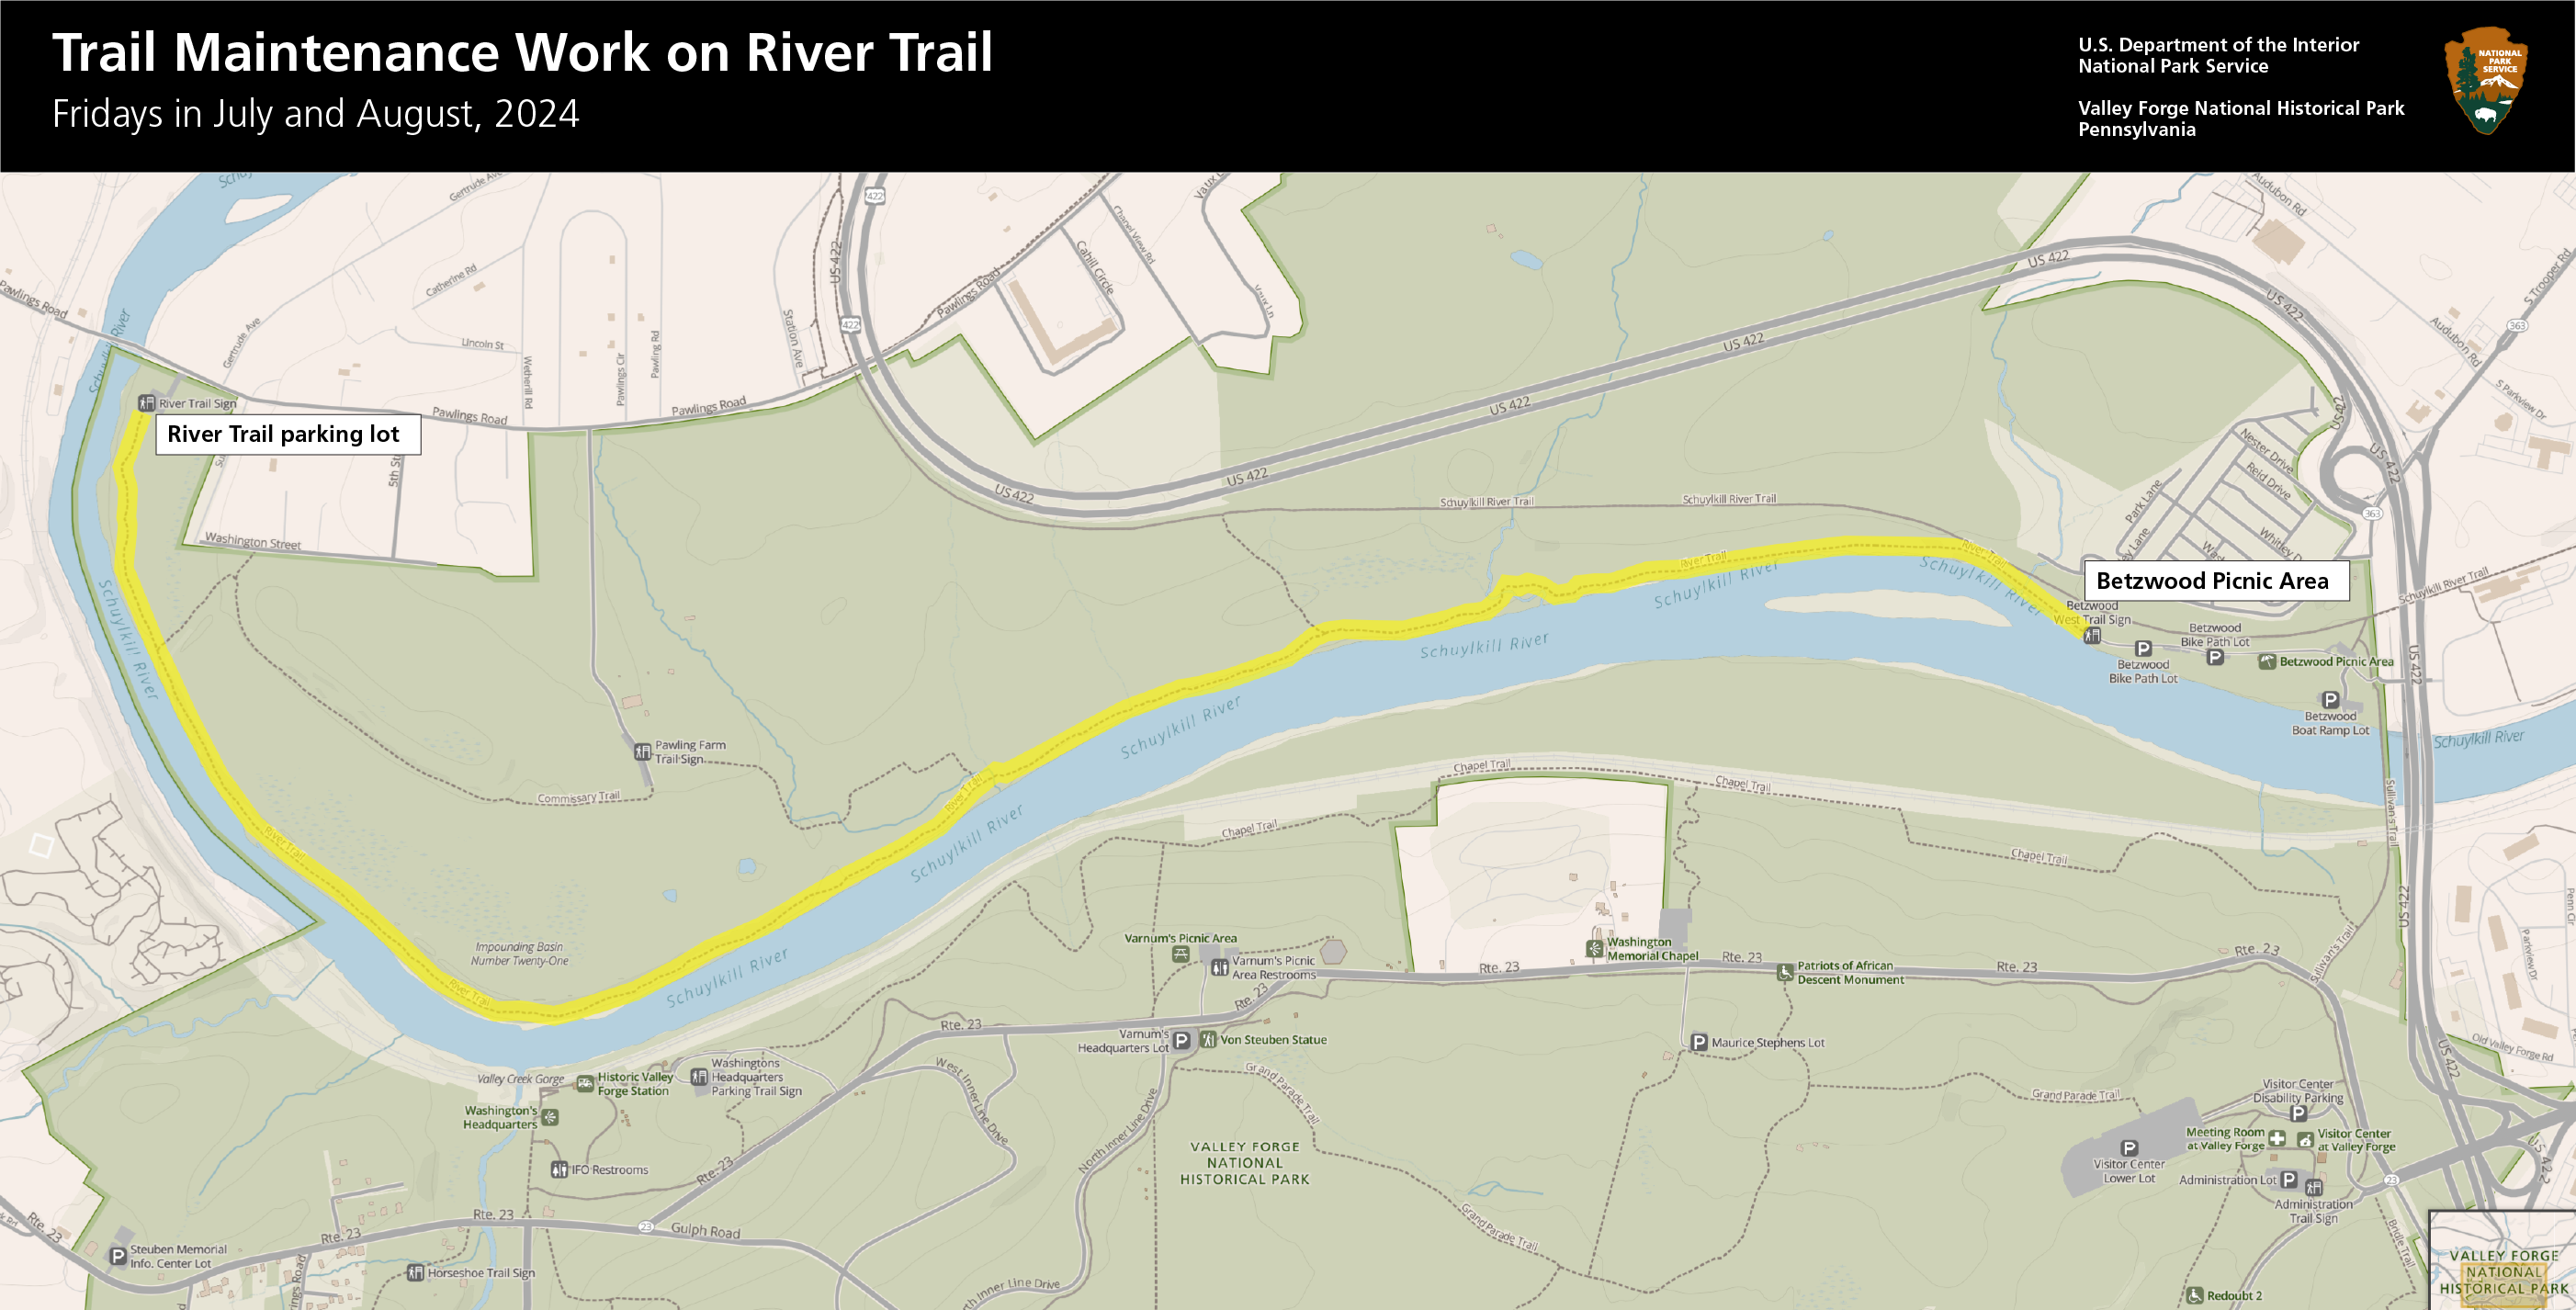 A map showing a highlighted 3-mile section of trail paralleling the Schuylkill River.